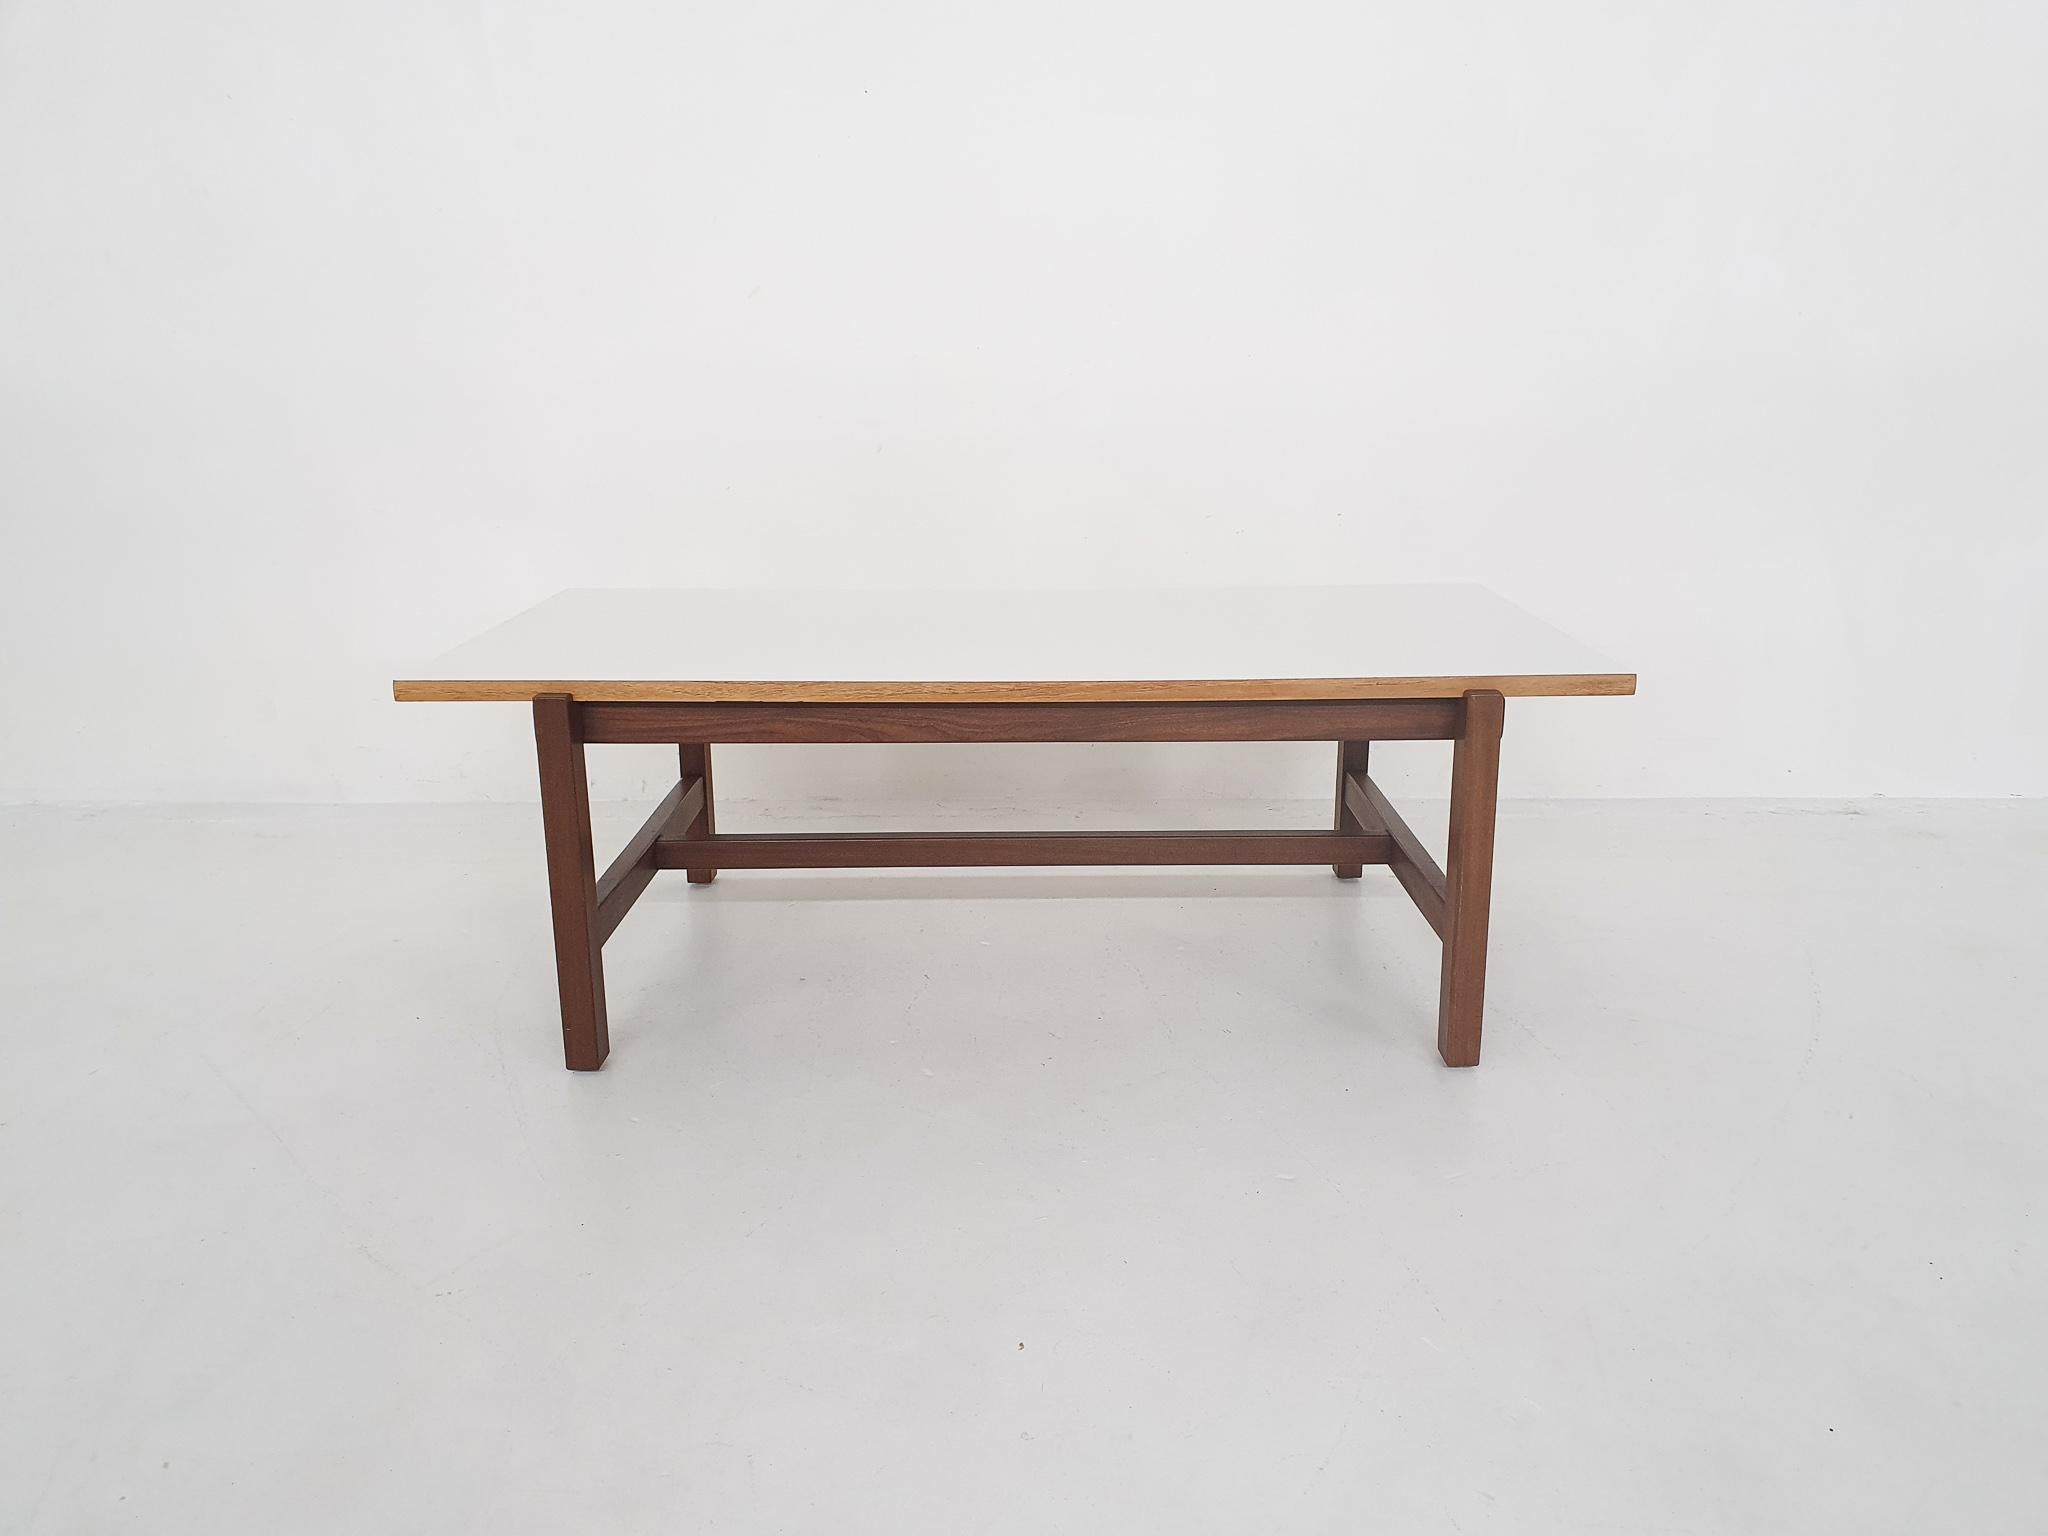 Teak coffee table with a reversible top. One side in teak veneer ad the other side in white formica.
The side of the top, has some veneer damage. The teak top has been refinshed.

Cees Braakman was a Dutch furniture designer who worked for UMS